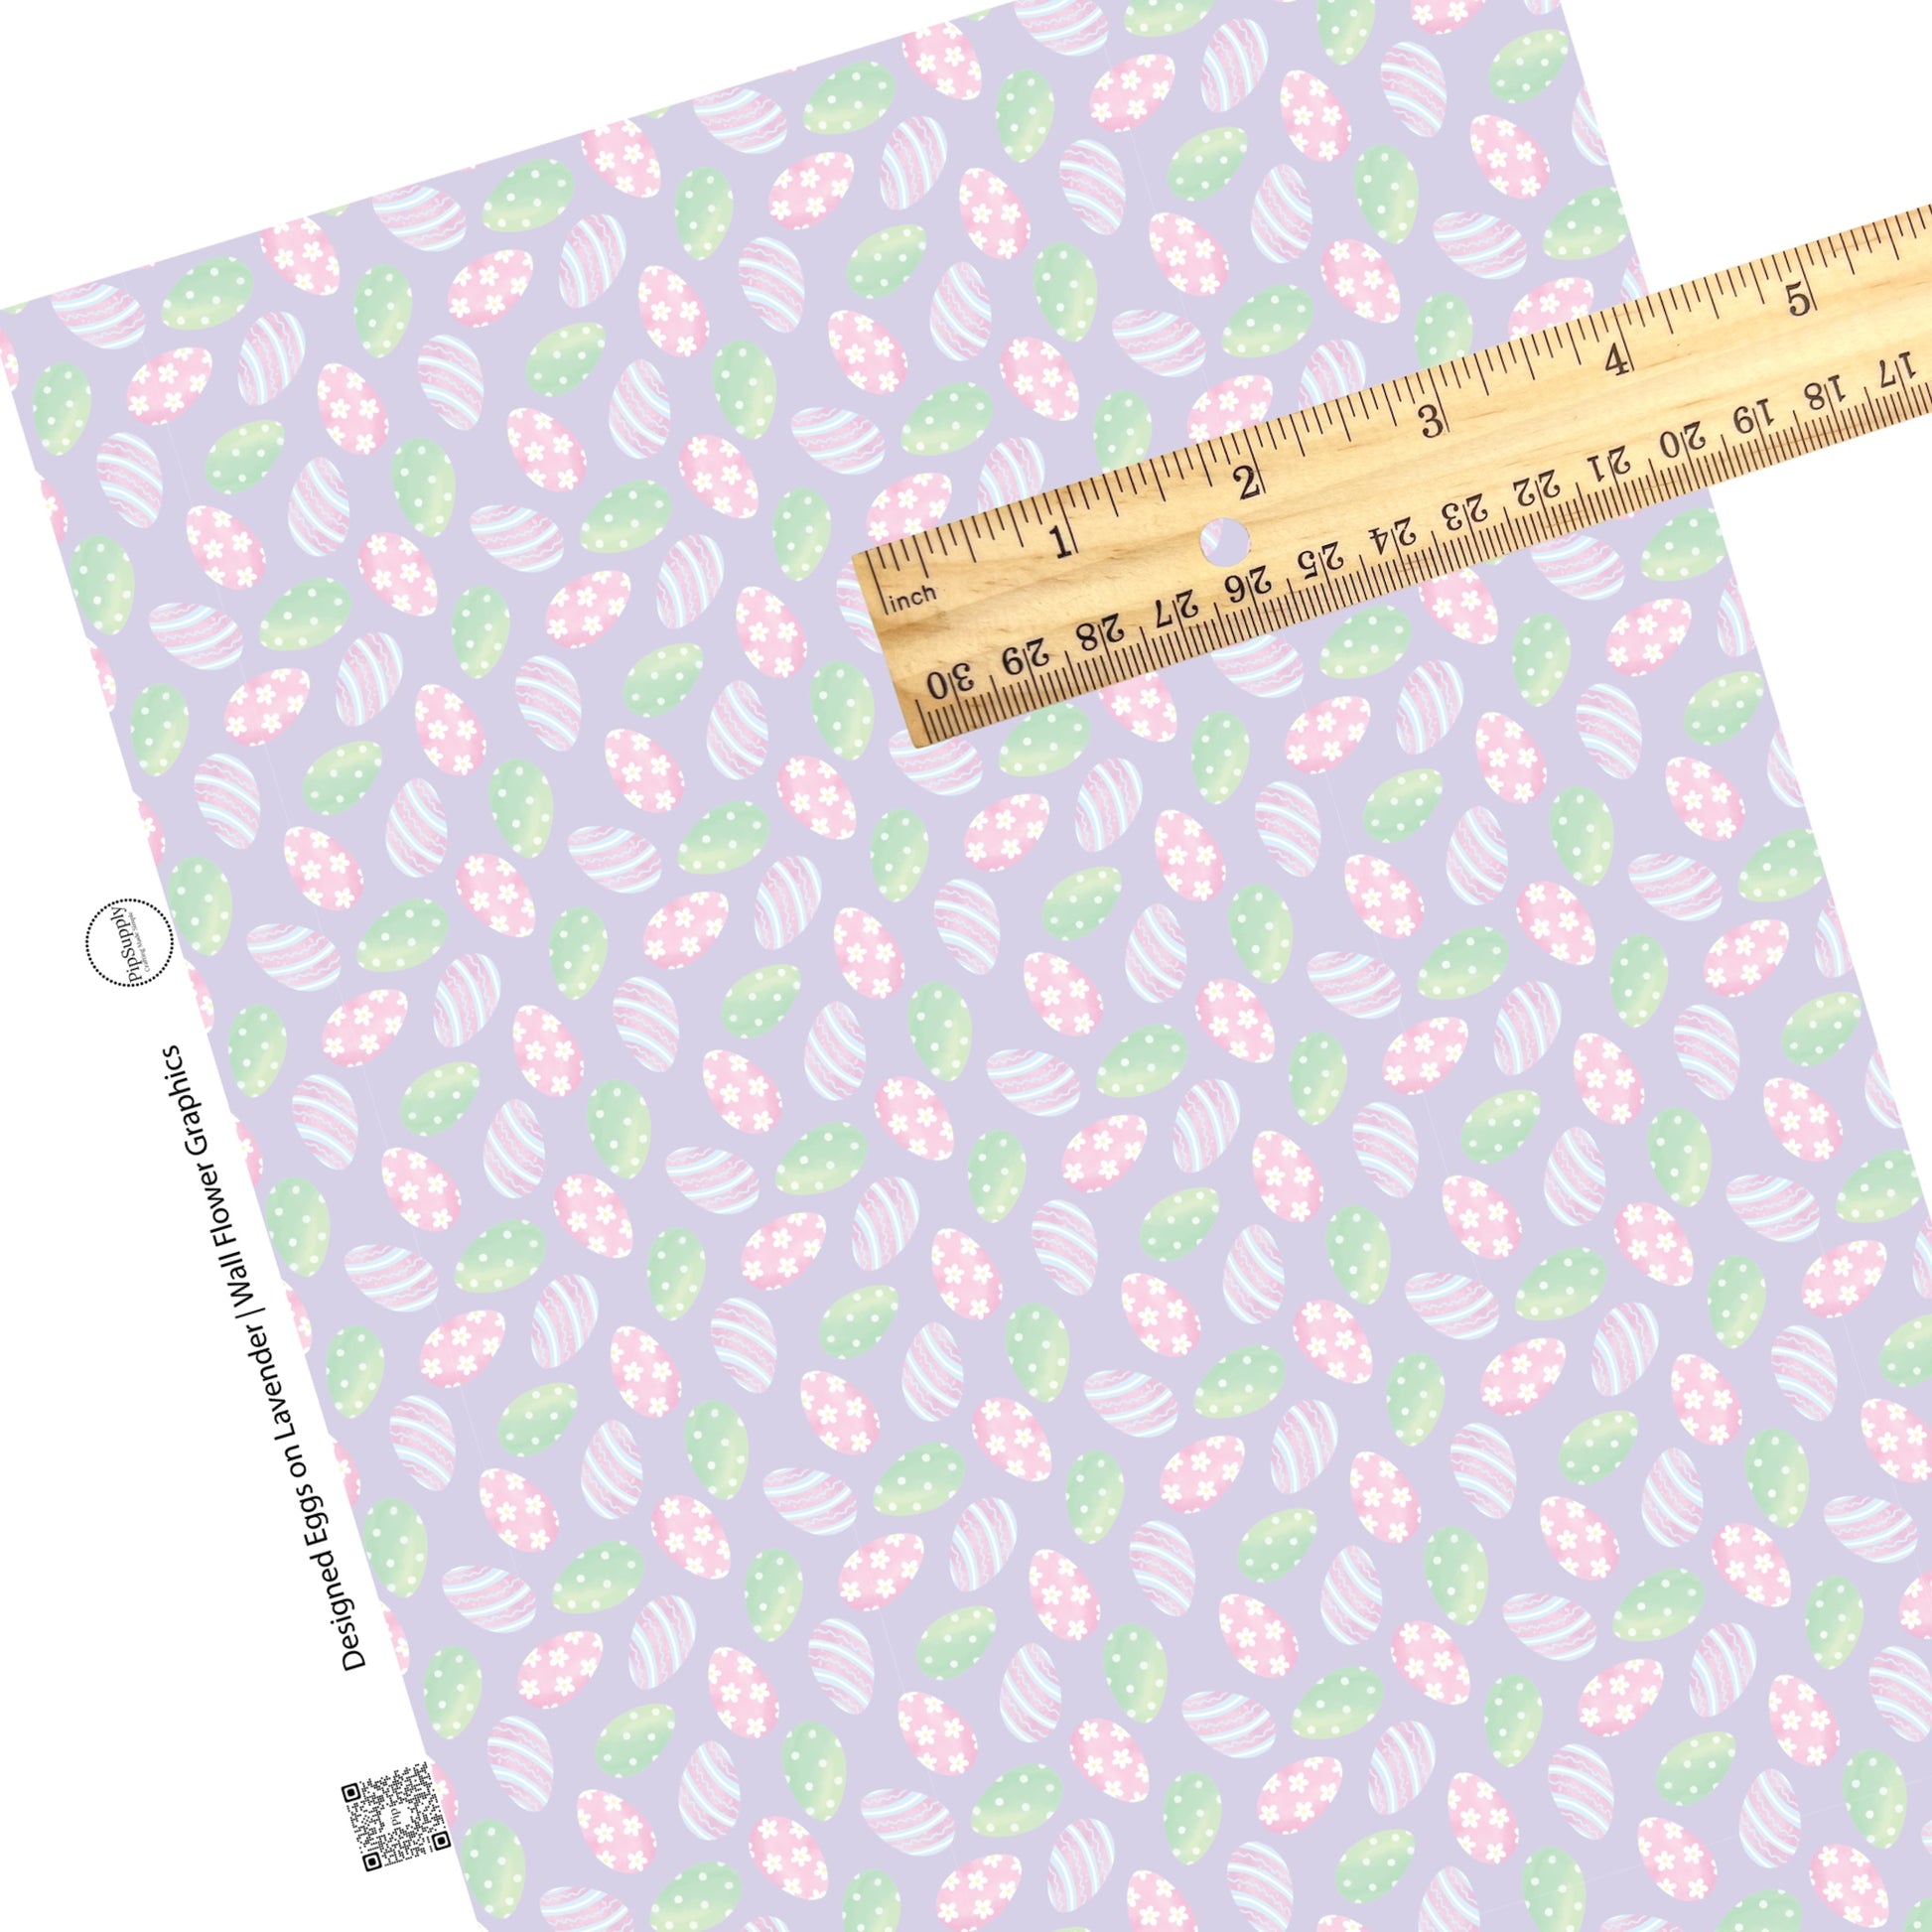 These spring pattern themed faux leather sheets contain the following design elements: pastel colored Easter eggs with stripes and flowers on light purple. Our CPSIA compliant faux leather sheets or rolls can be used for all types of crafting projects.